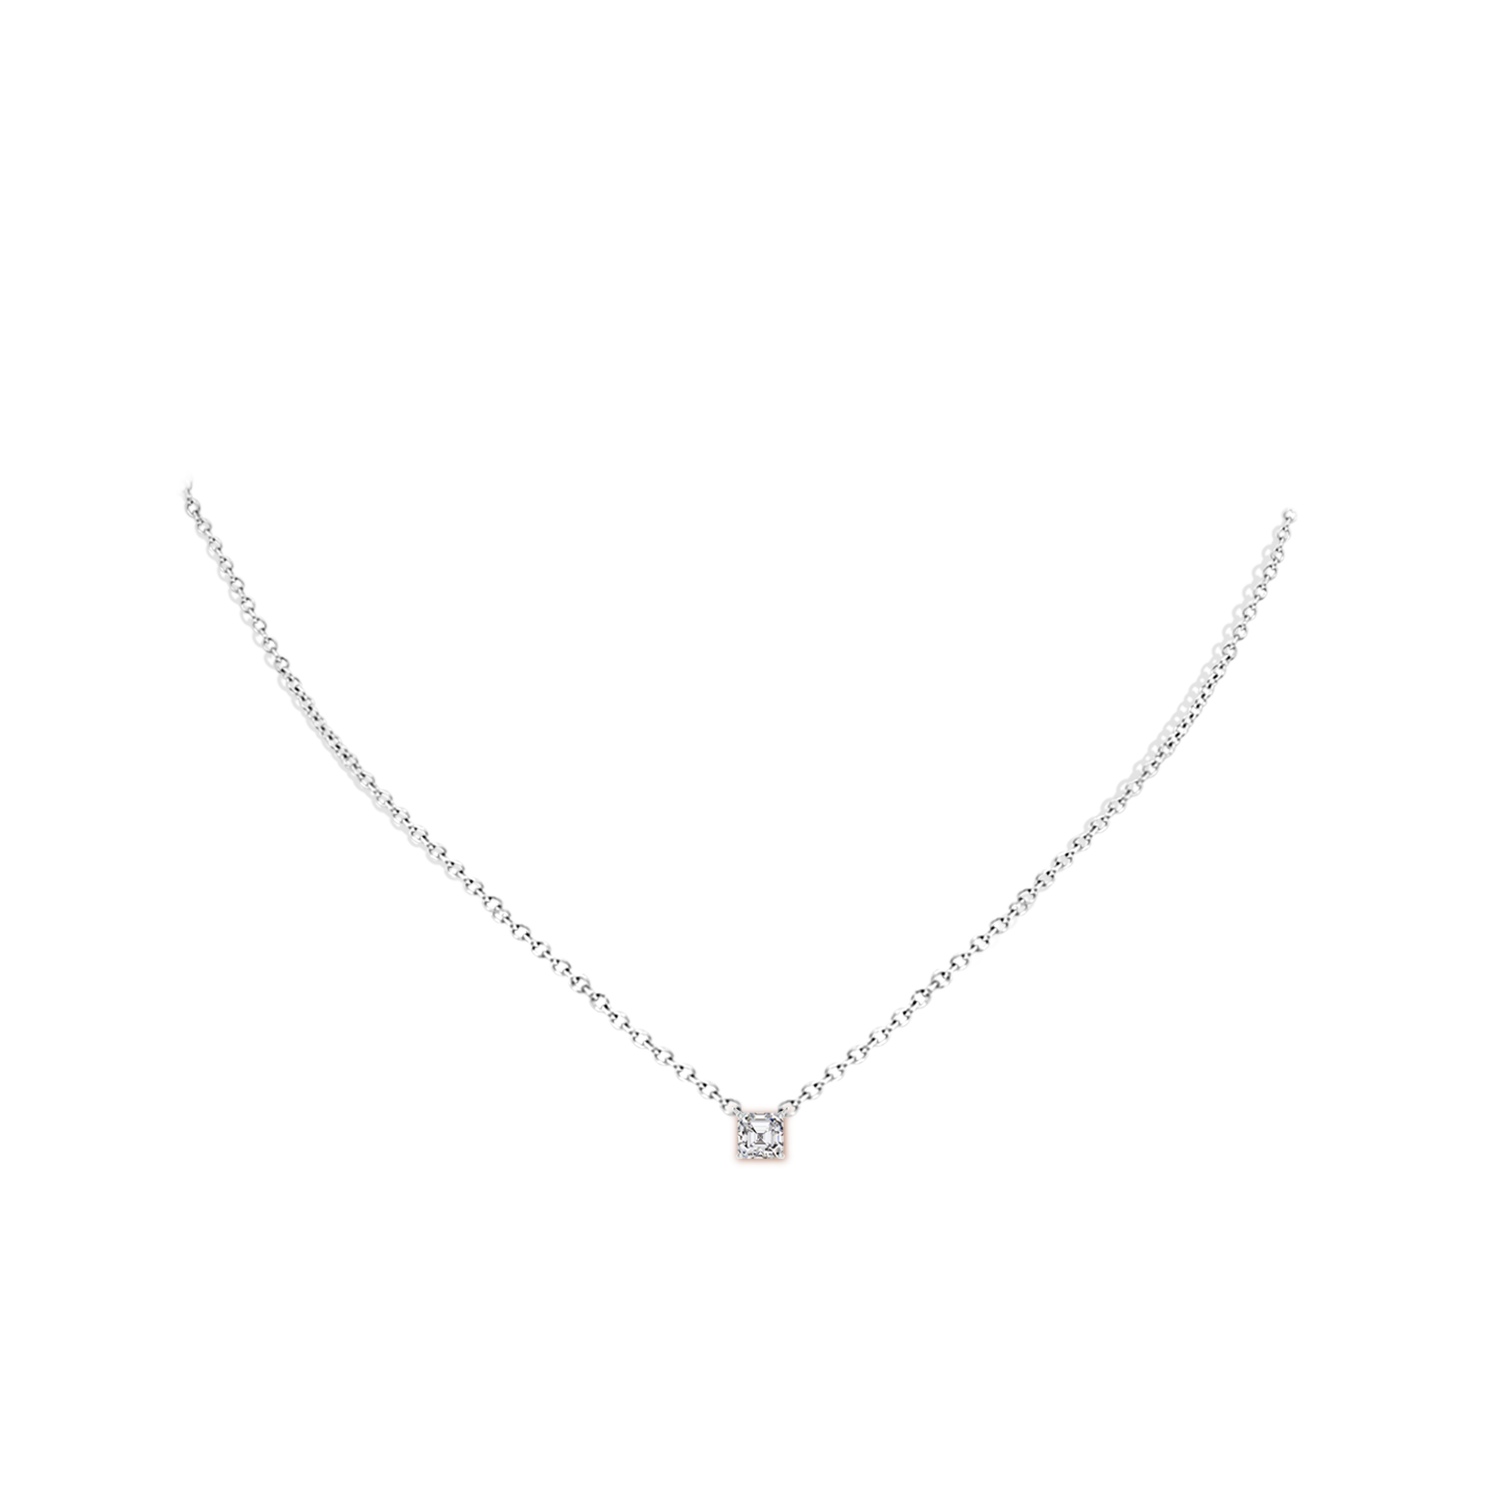 H, SI2 / 2 CT / 18 KT White Gold